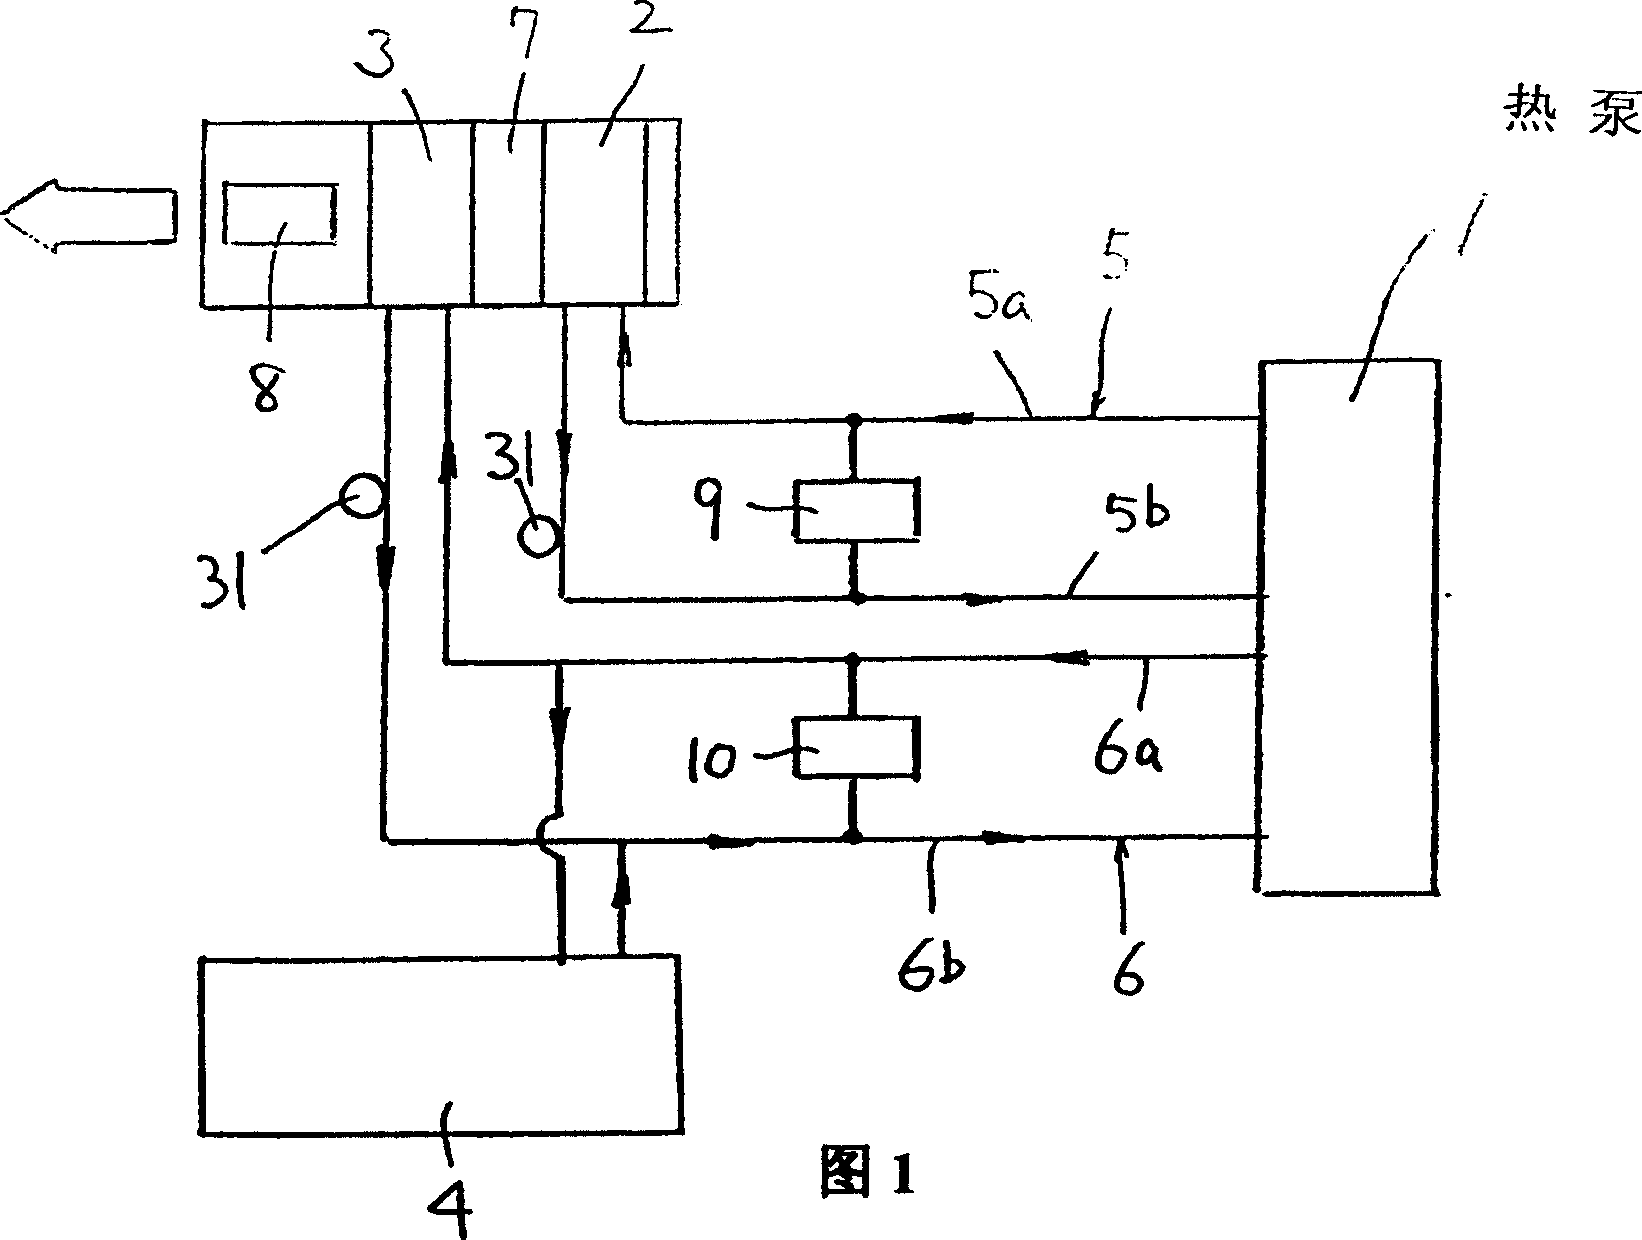 Air conditioning device with floor heating function